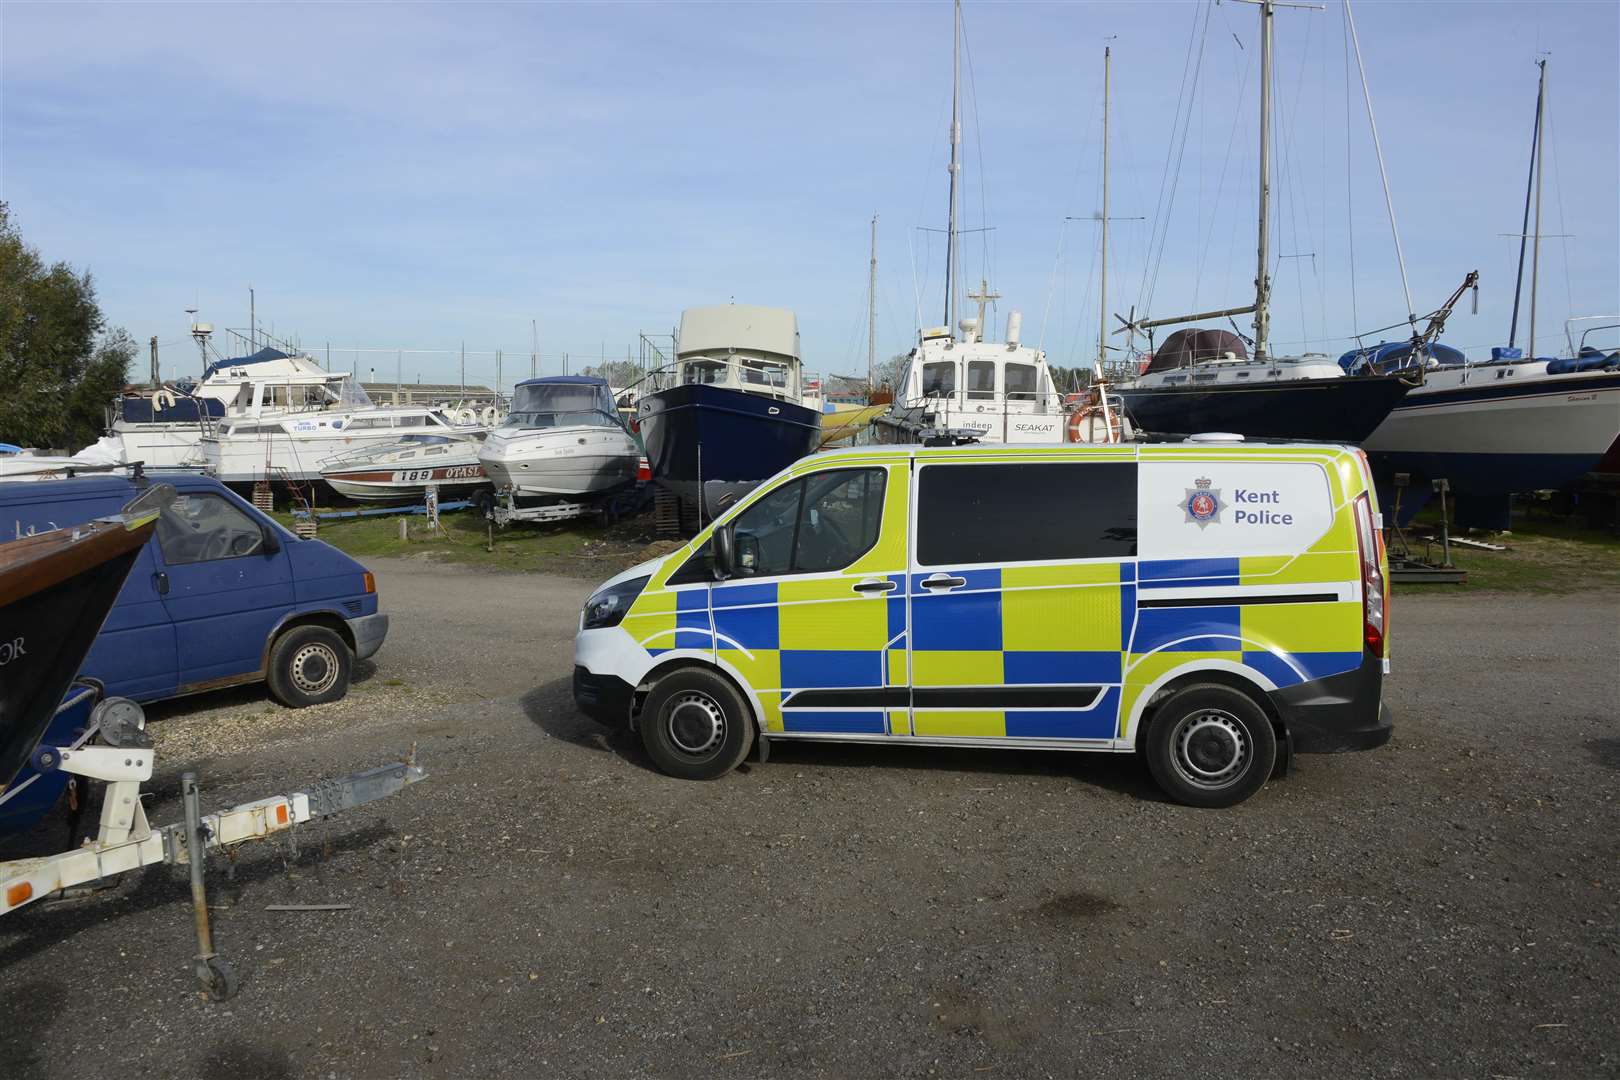 The shooting took place at Sandwich Marina. Picture: Paul Amos